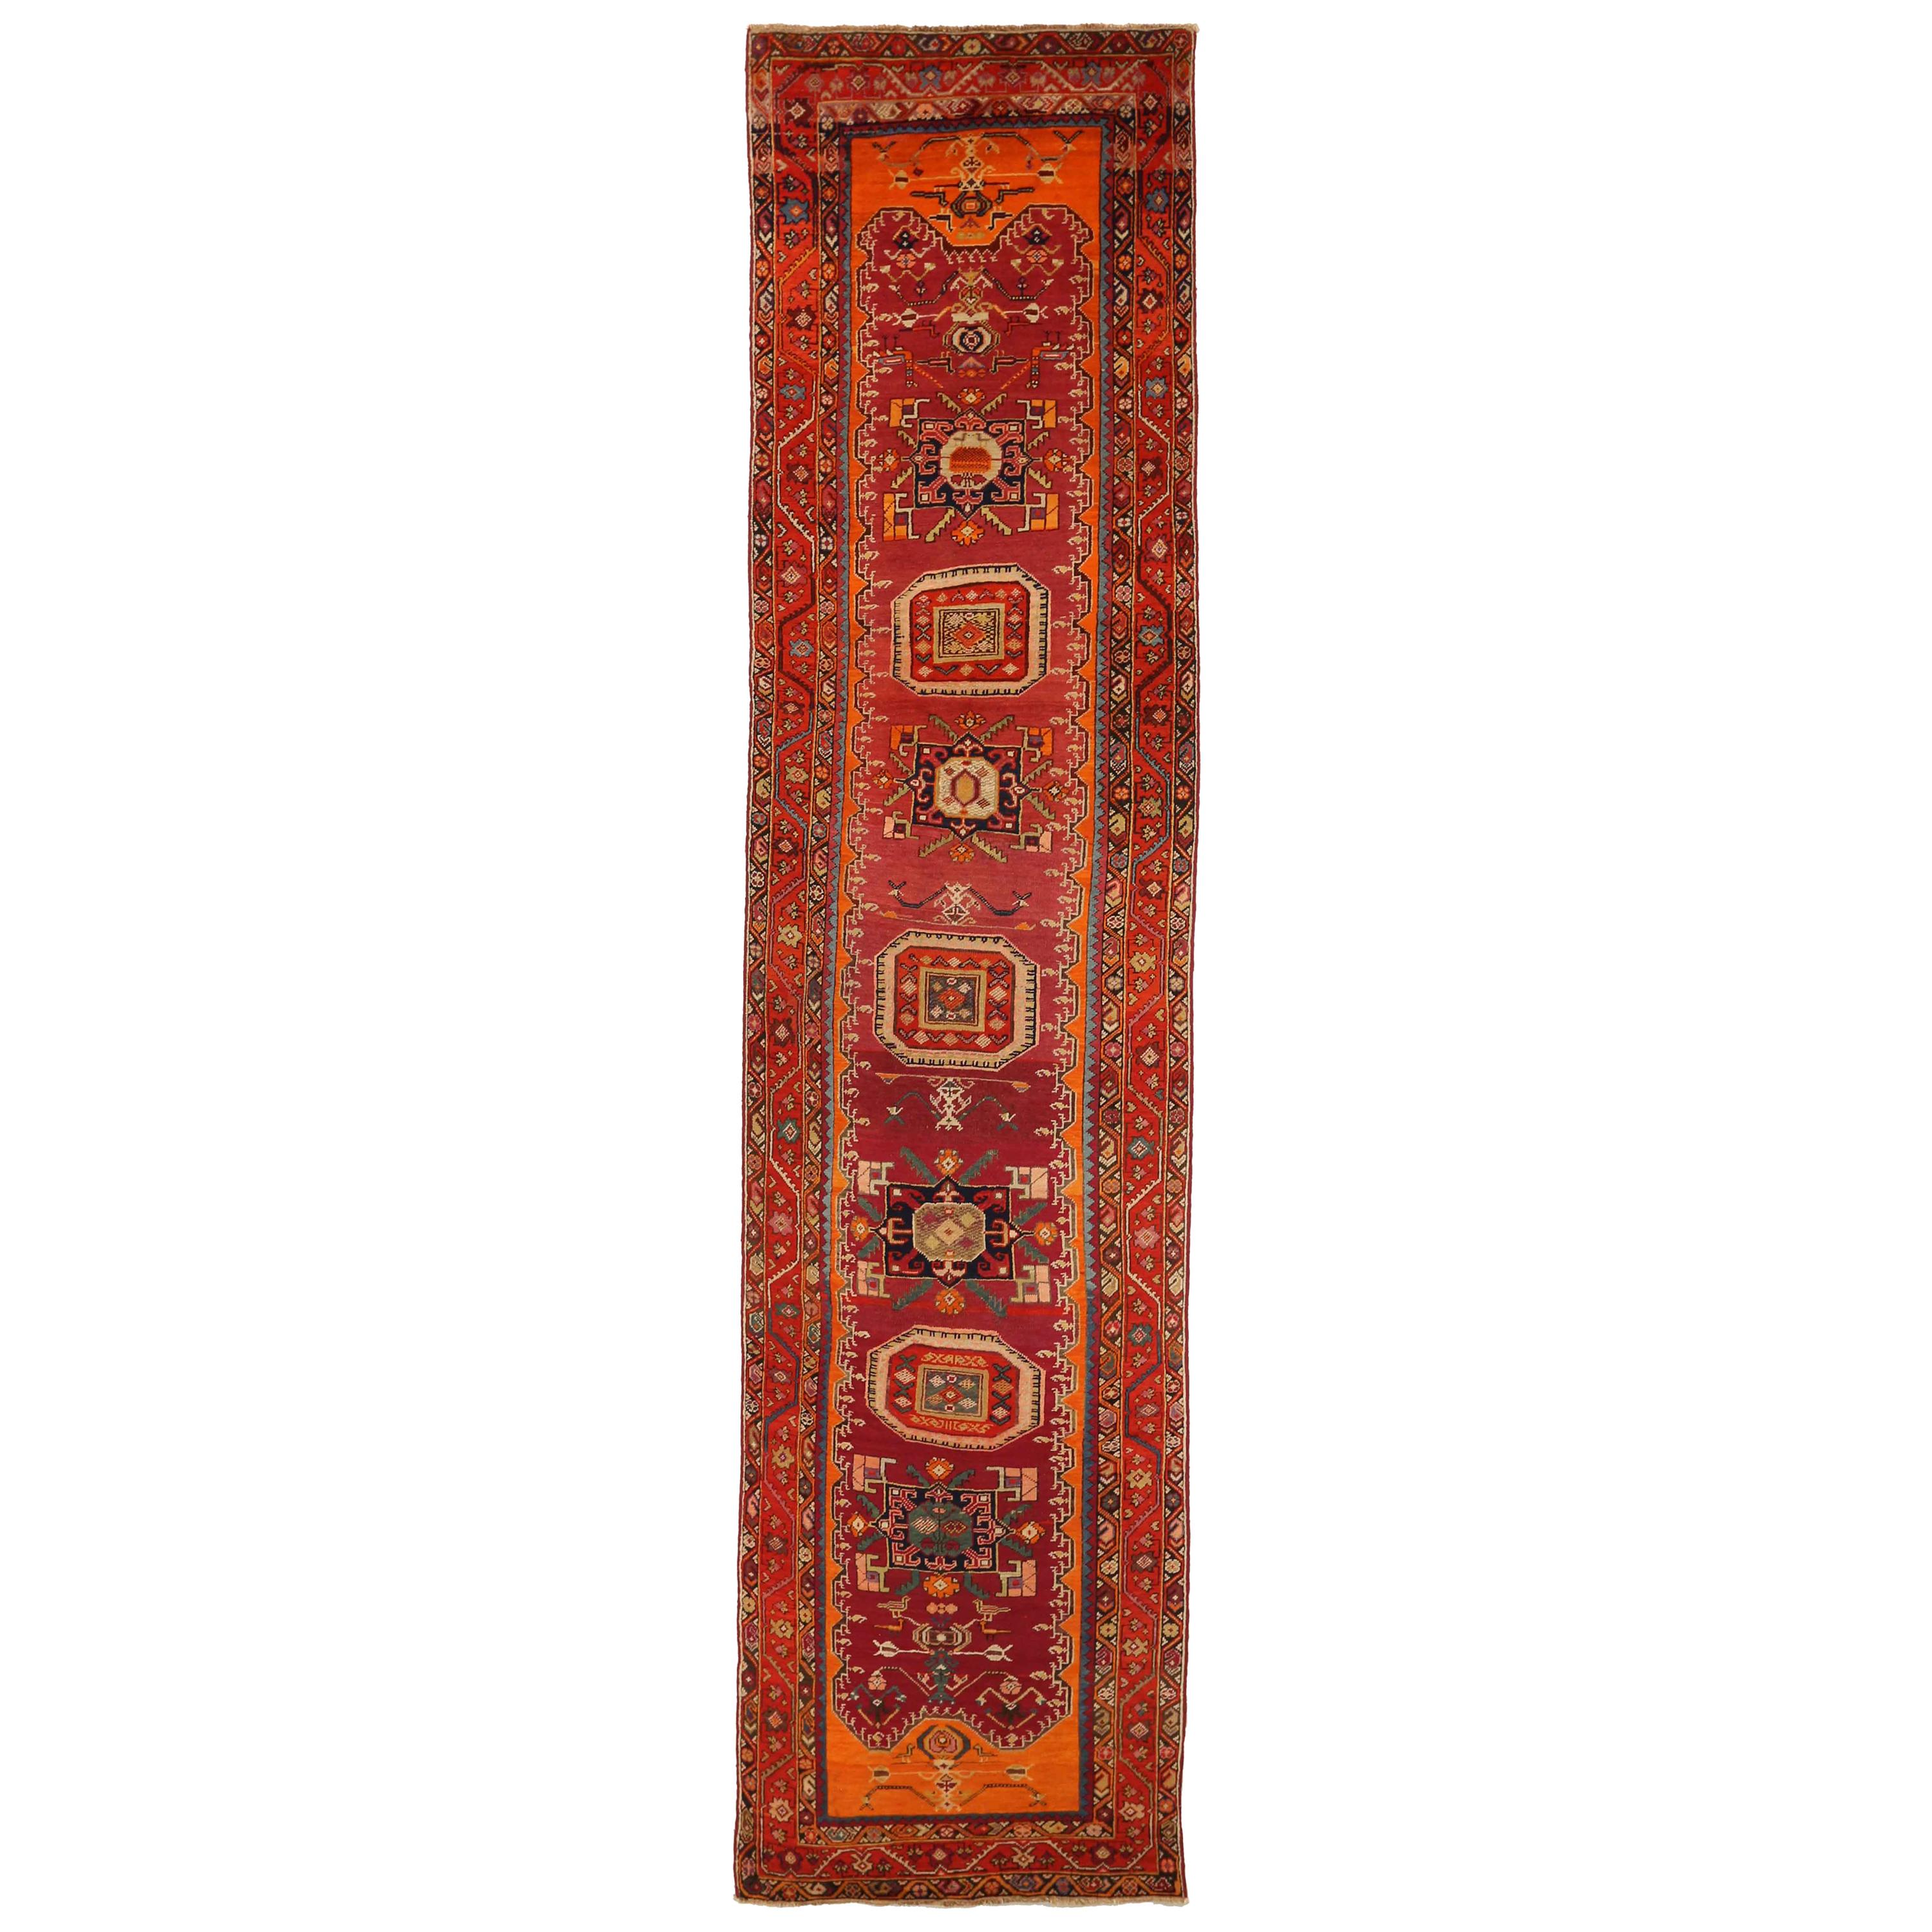 1950s Twin Antique Persian Rug with Gemstone Design Handwoven Karabagh Style